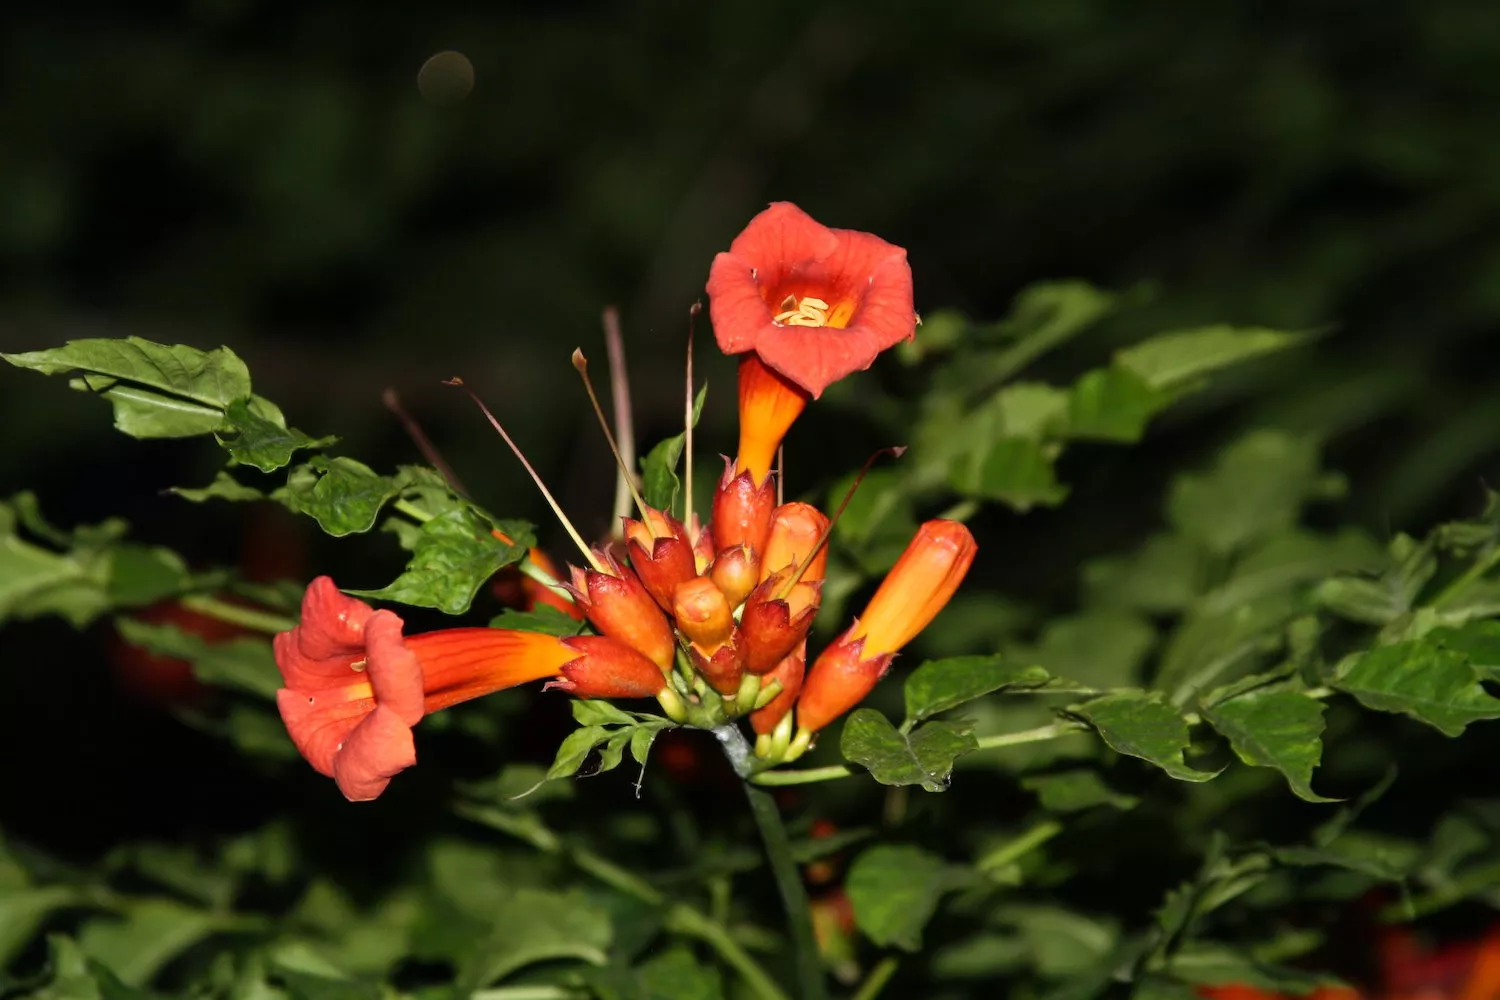 The fluted, trumpet creeper vine flowers show off their orangish-red colors